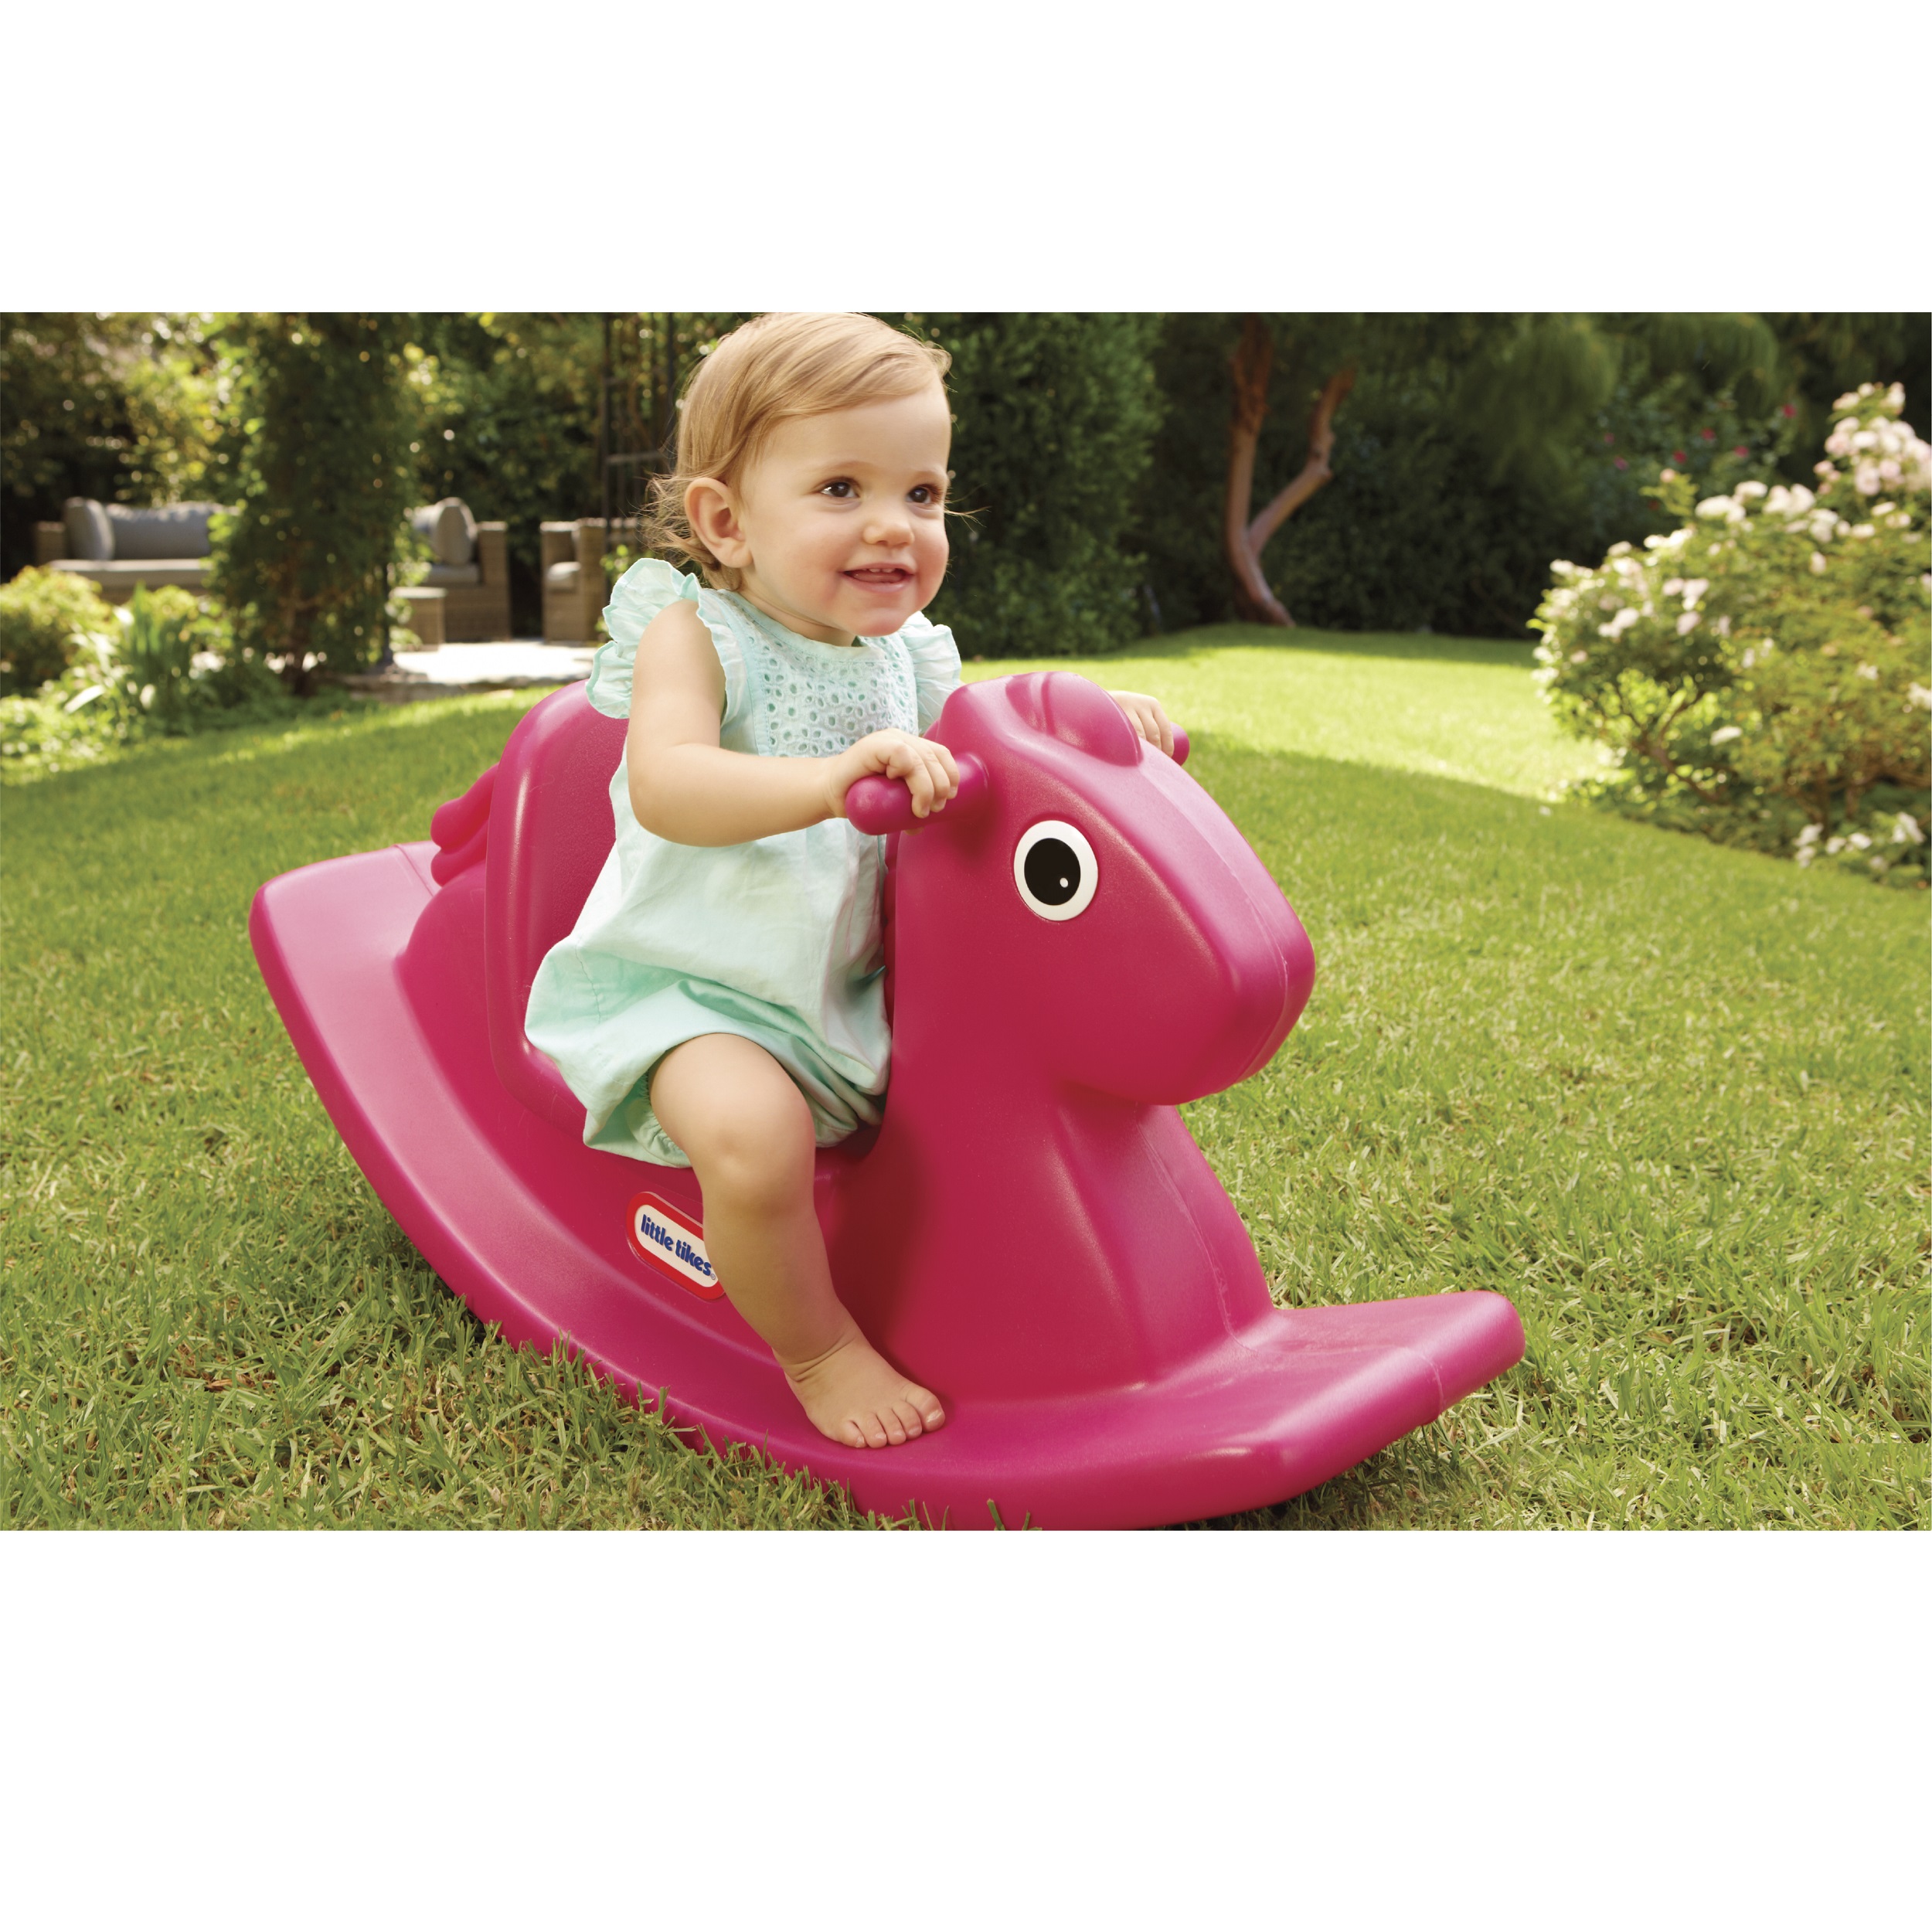 Little Tikes Kids Rocking Horse in Magenta, Classic Indoor Outdoor Toddler Ride-on Toy, Kids Boys Girls Ages 12 Months to 3 Years - image 3 of 5